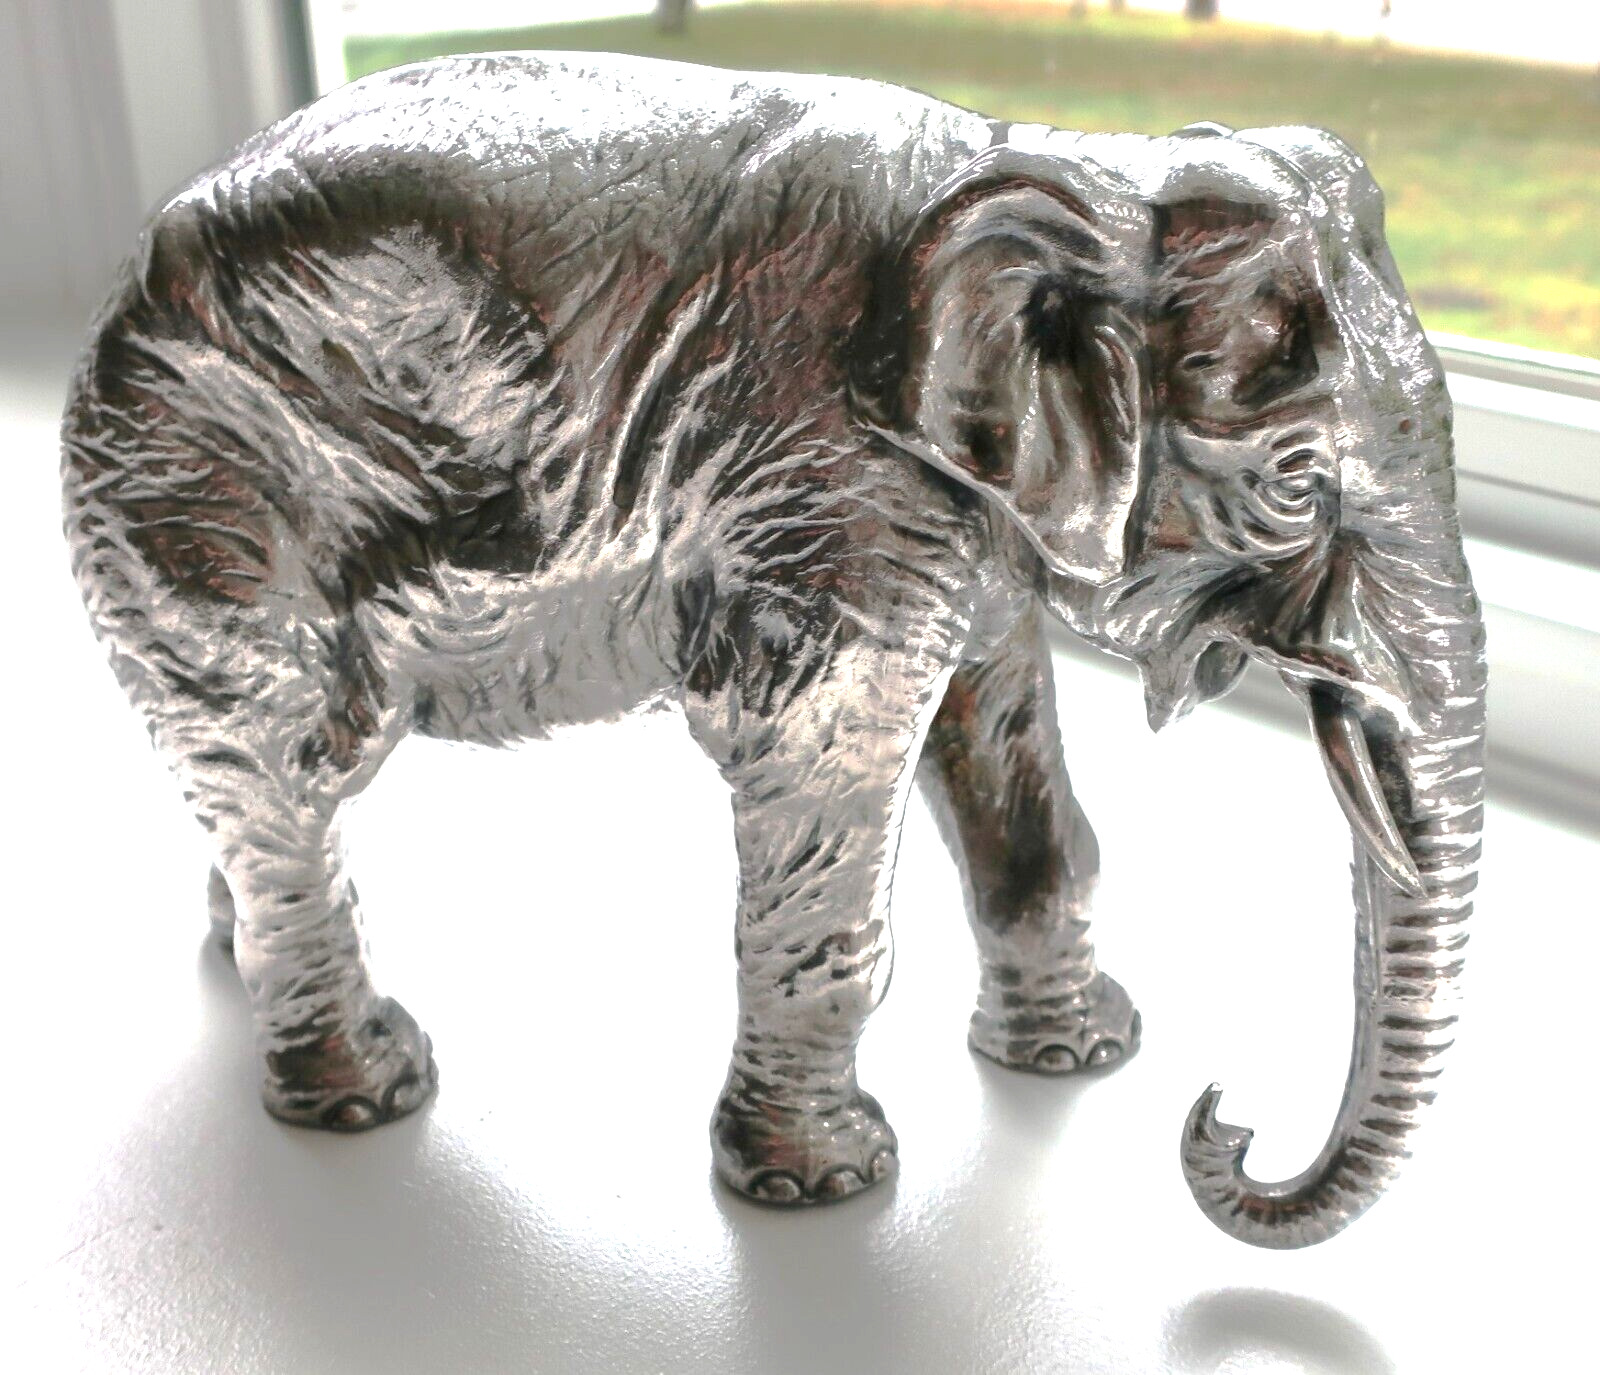 Lg Rare 9" Jennings Brothers Antique Silverplate Elephant Statue 1890 Victorian